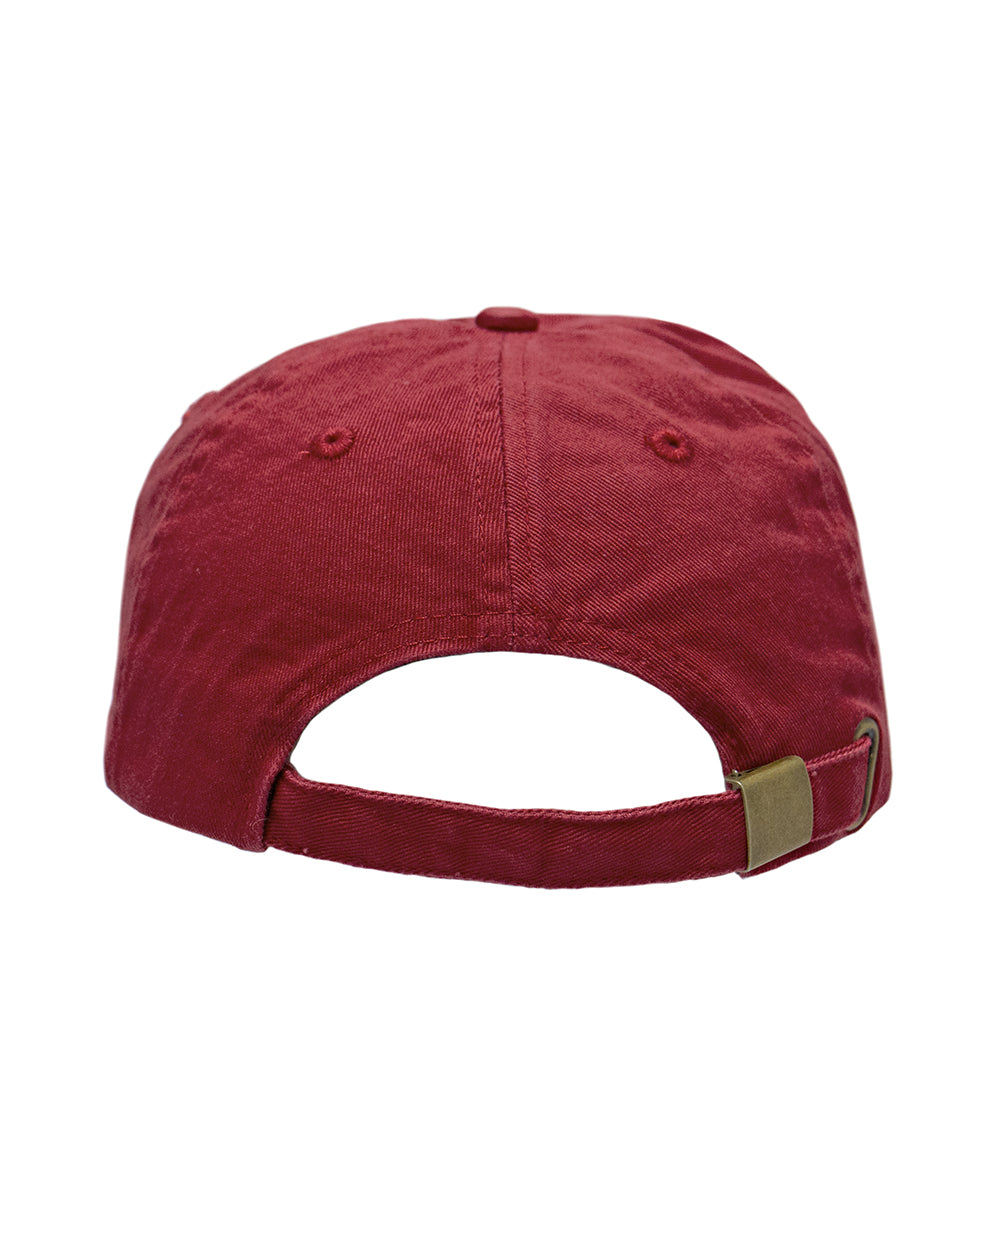 Lion Red Retro Cap -  Beer Gear Apparel & Merchandise - Speights - Lion Red - VB - Tokyo Dy merch